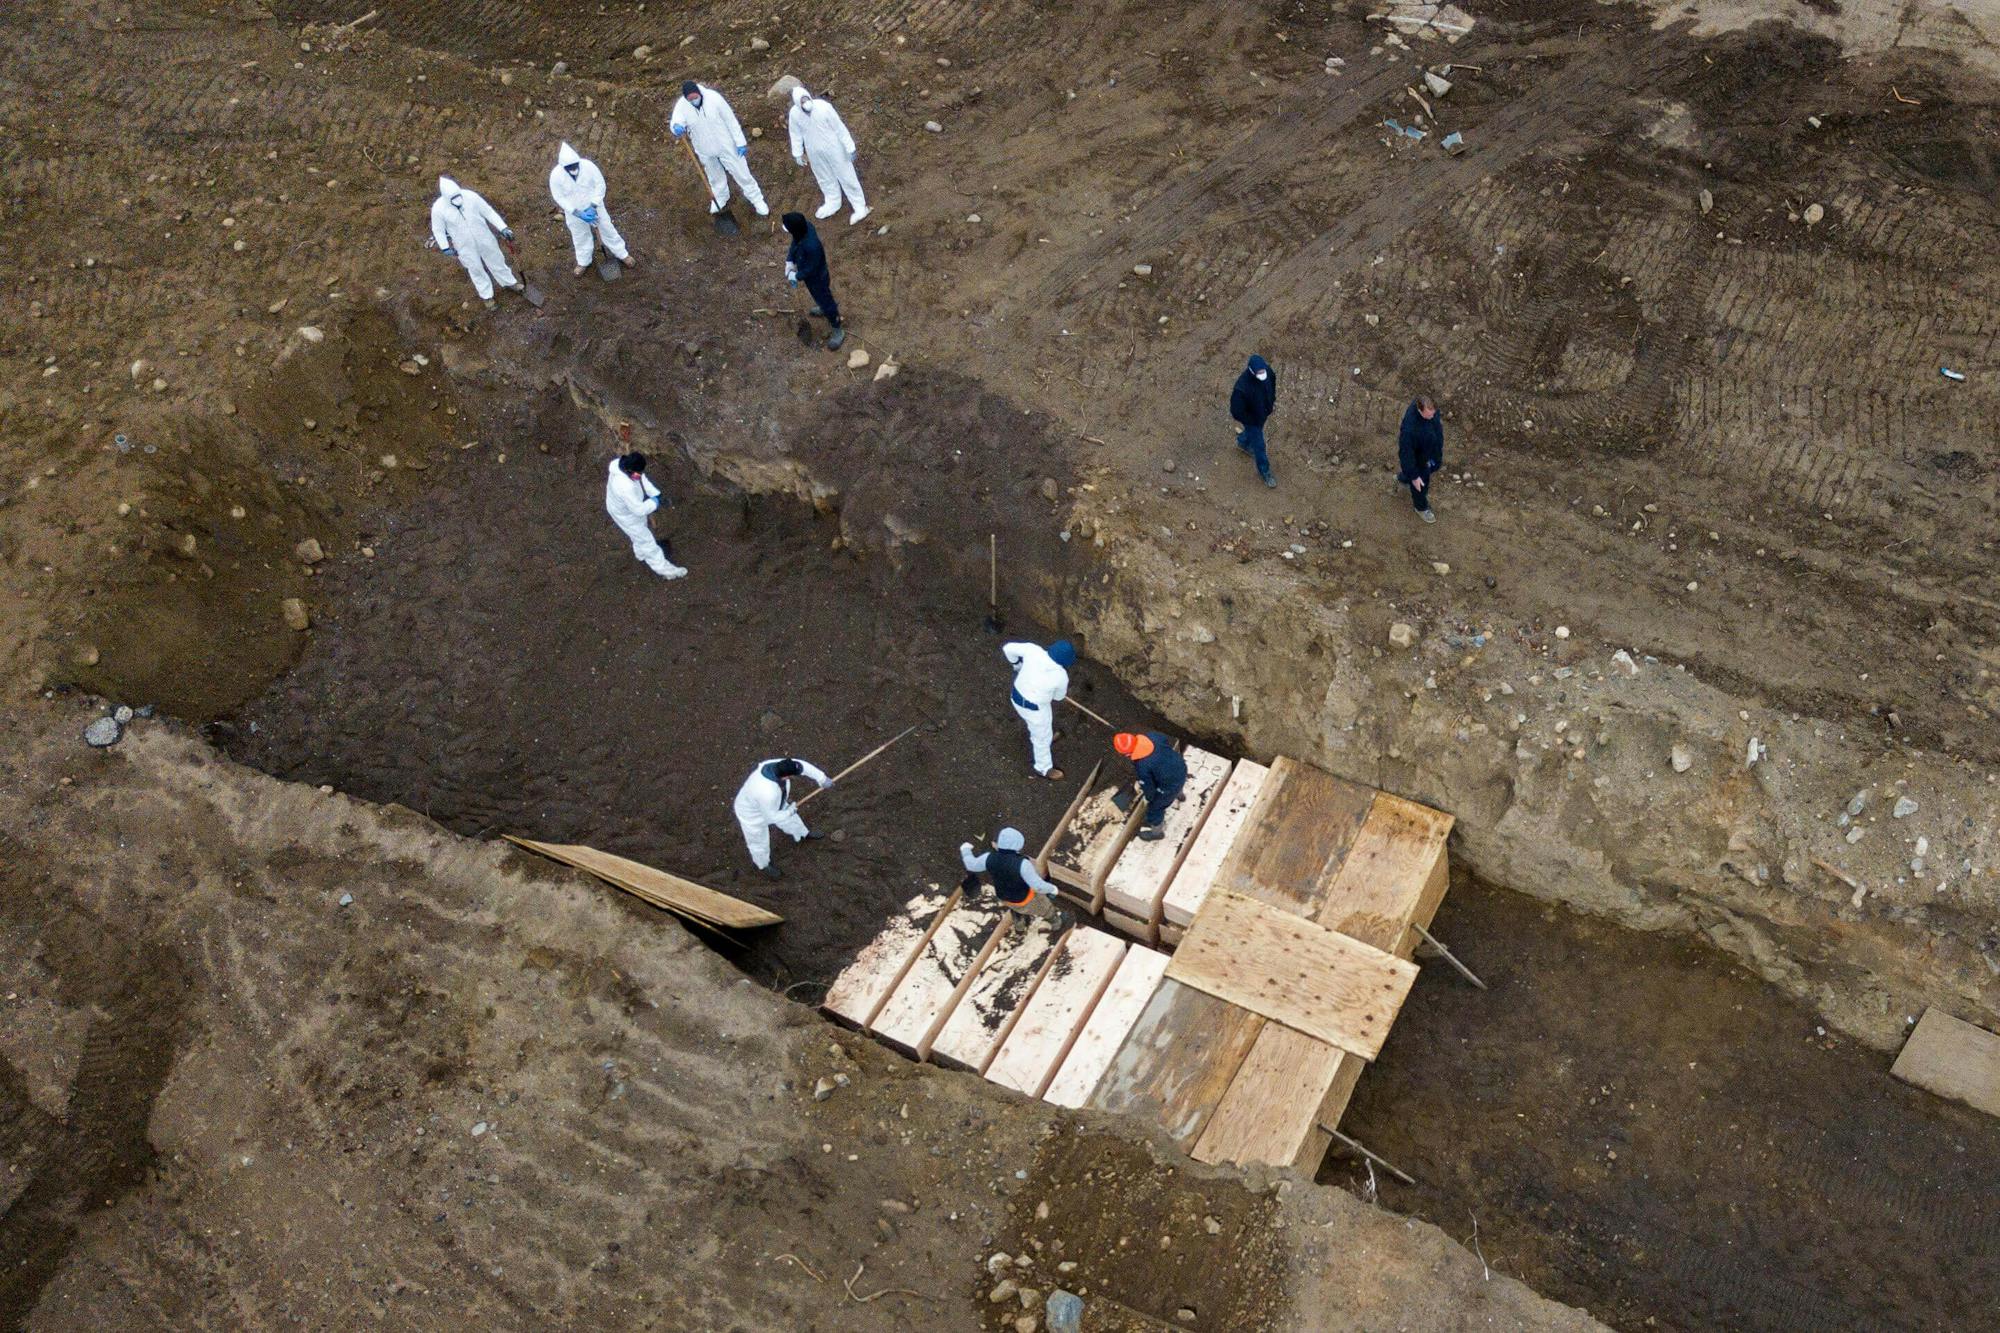 Drone pictures show bodies being buried on New York's Hart Island